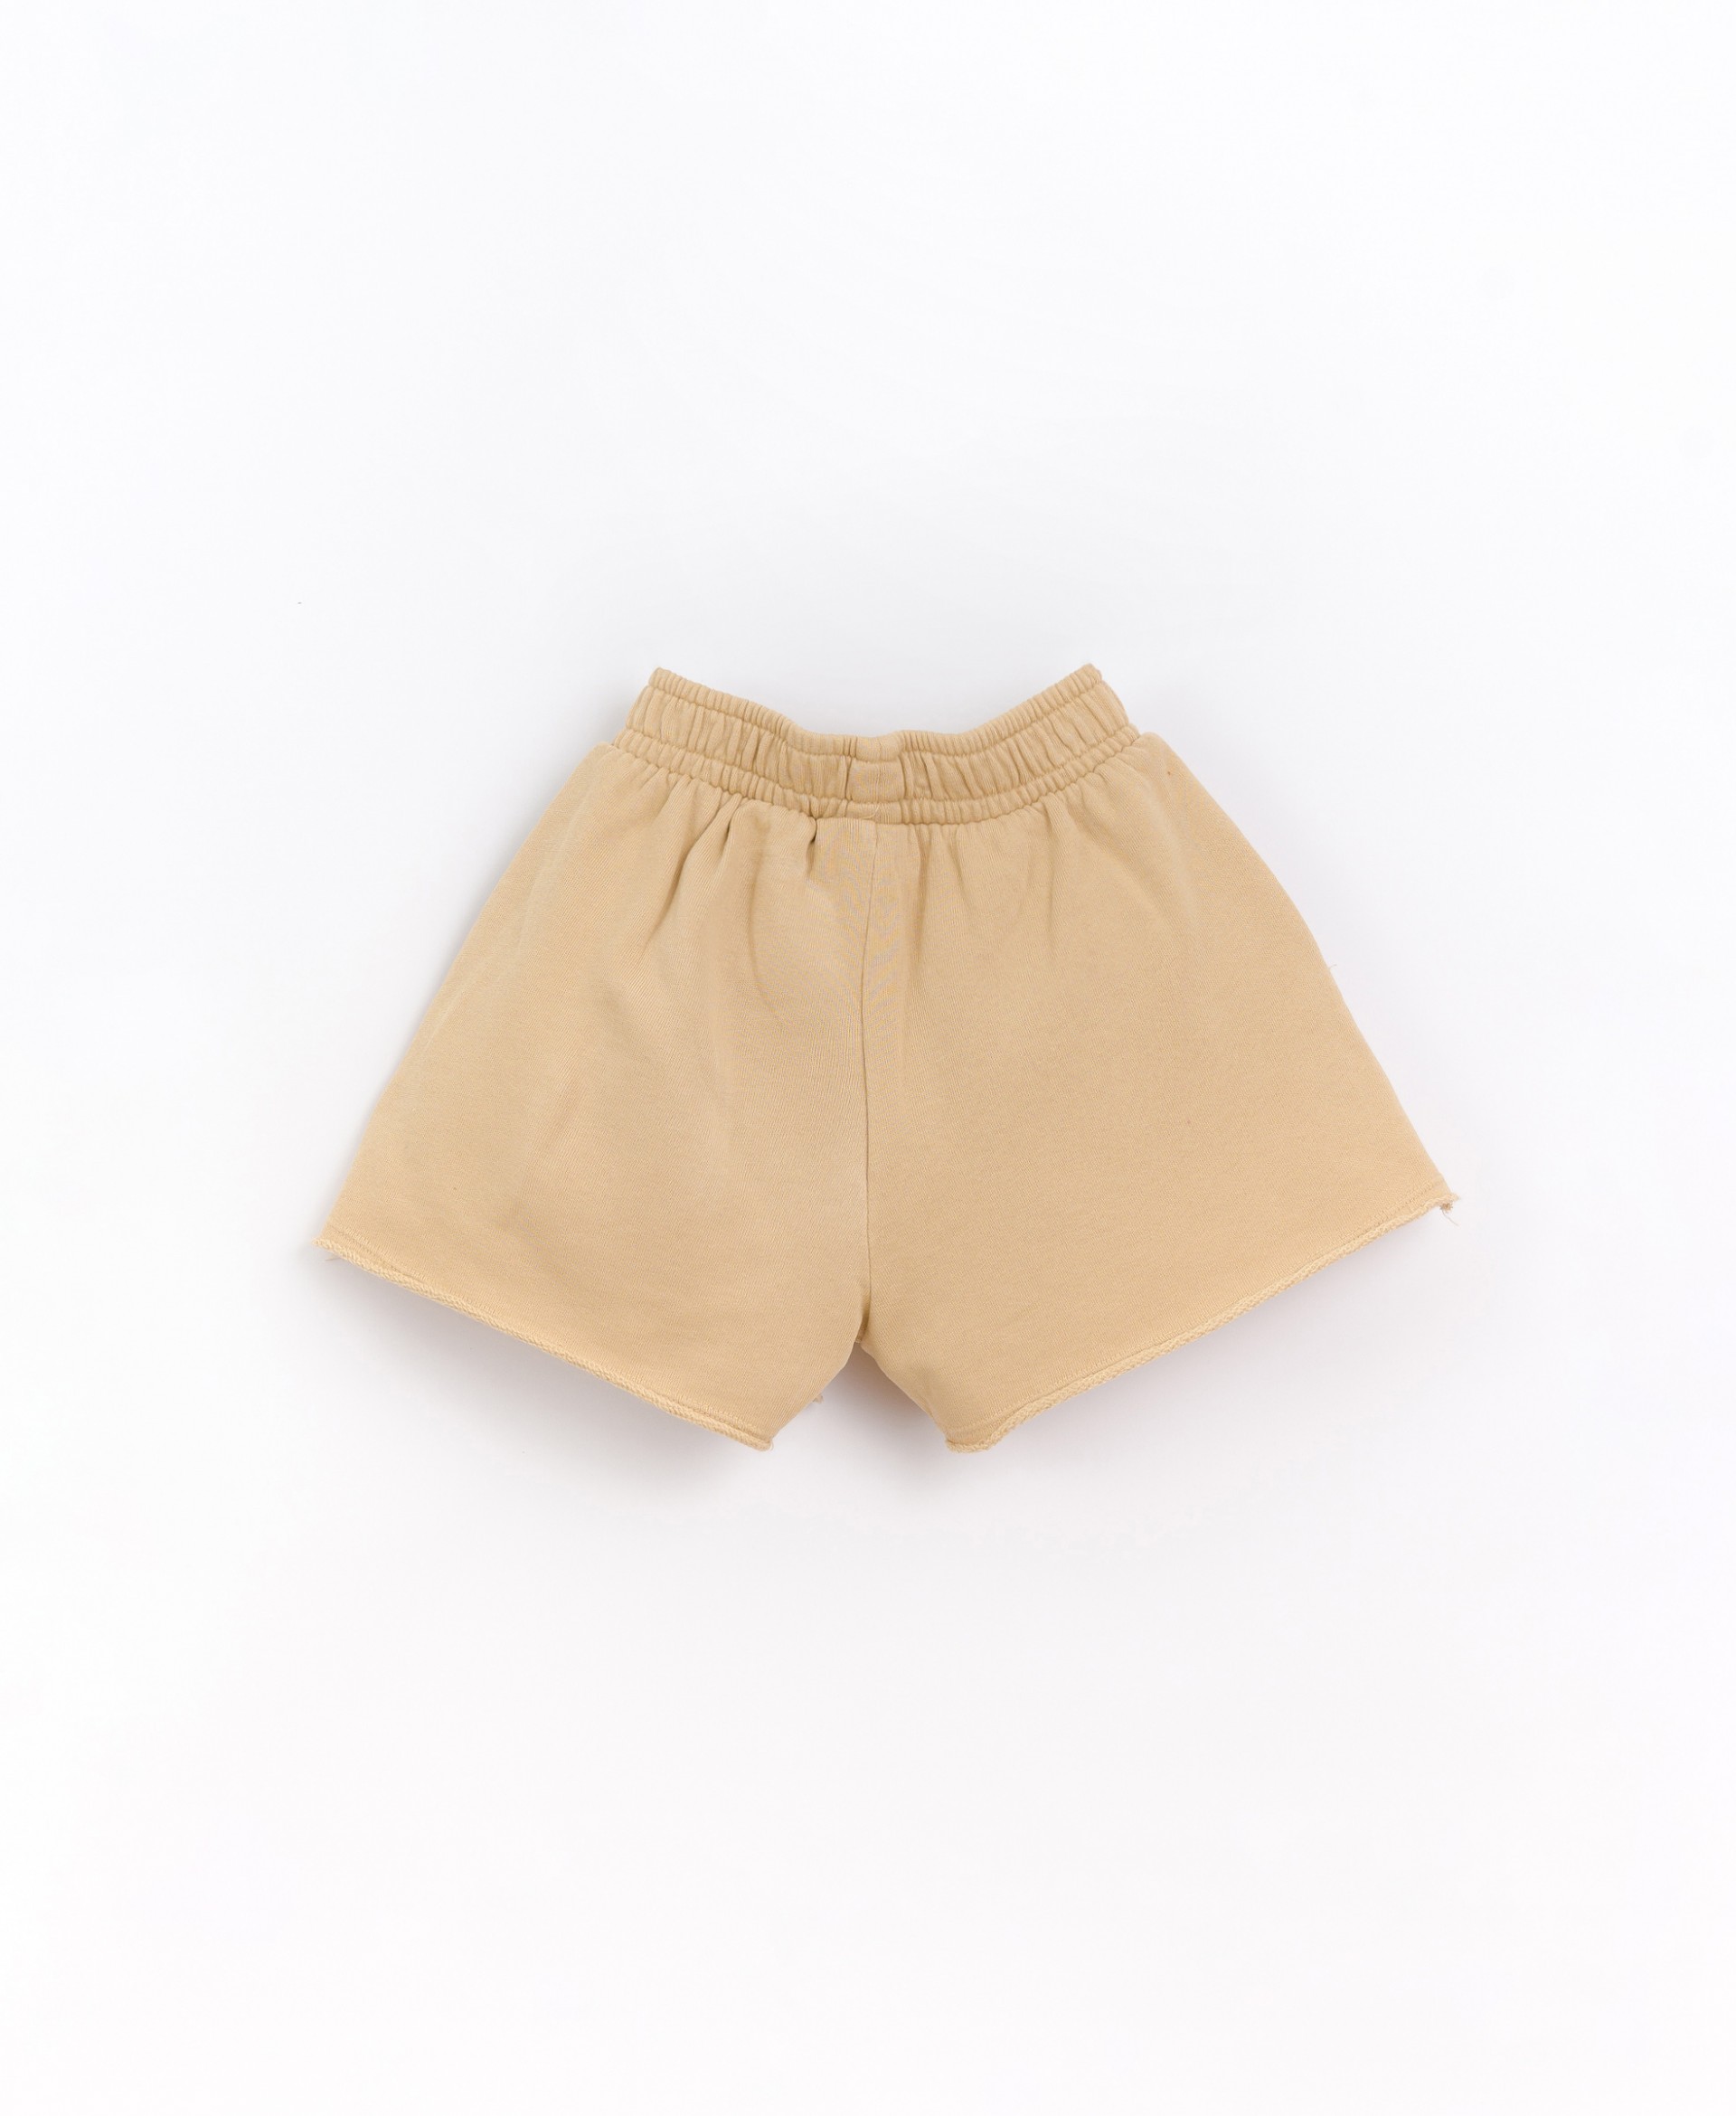 Shorts with pockets | Basketry